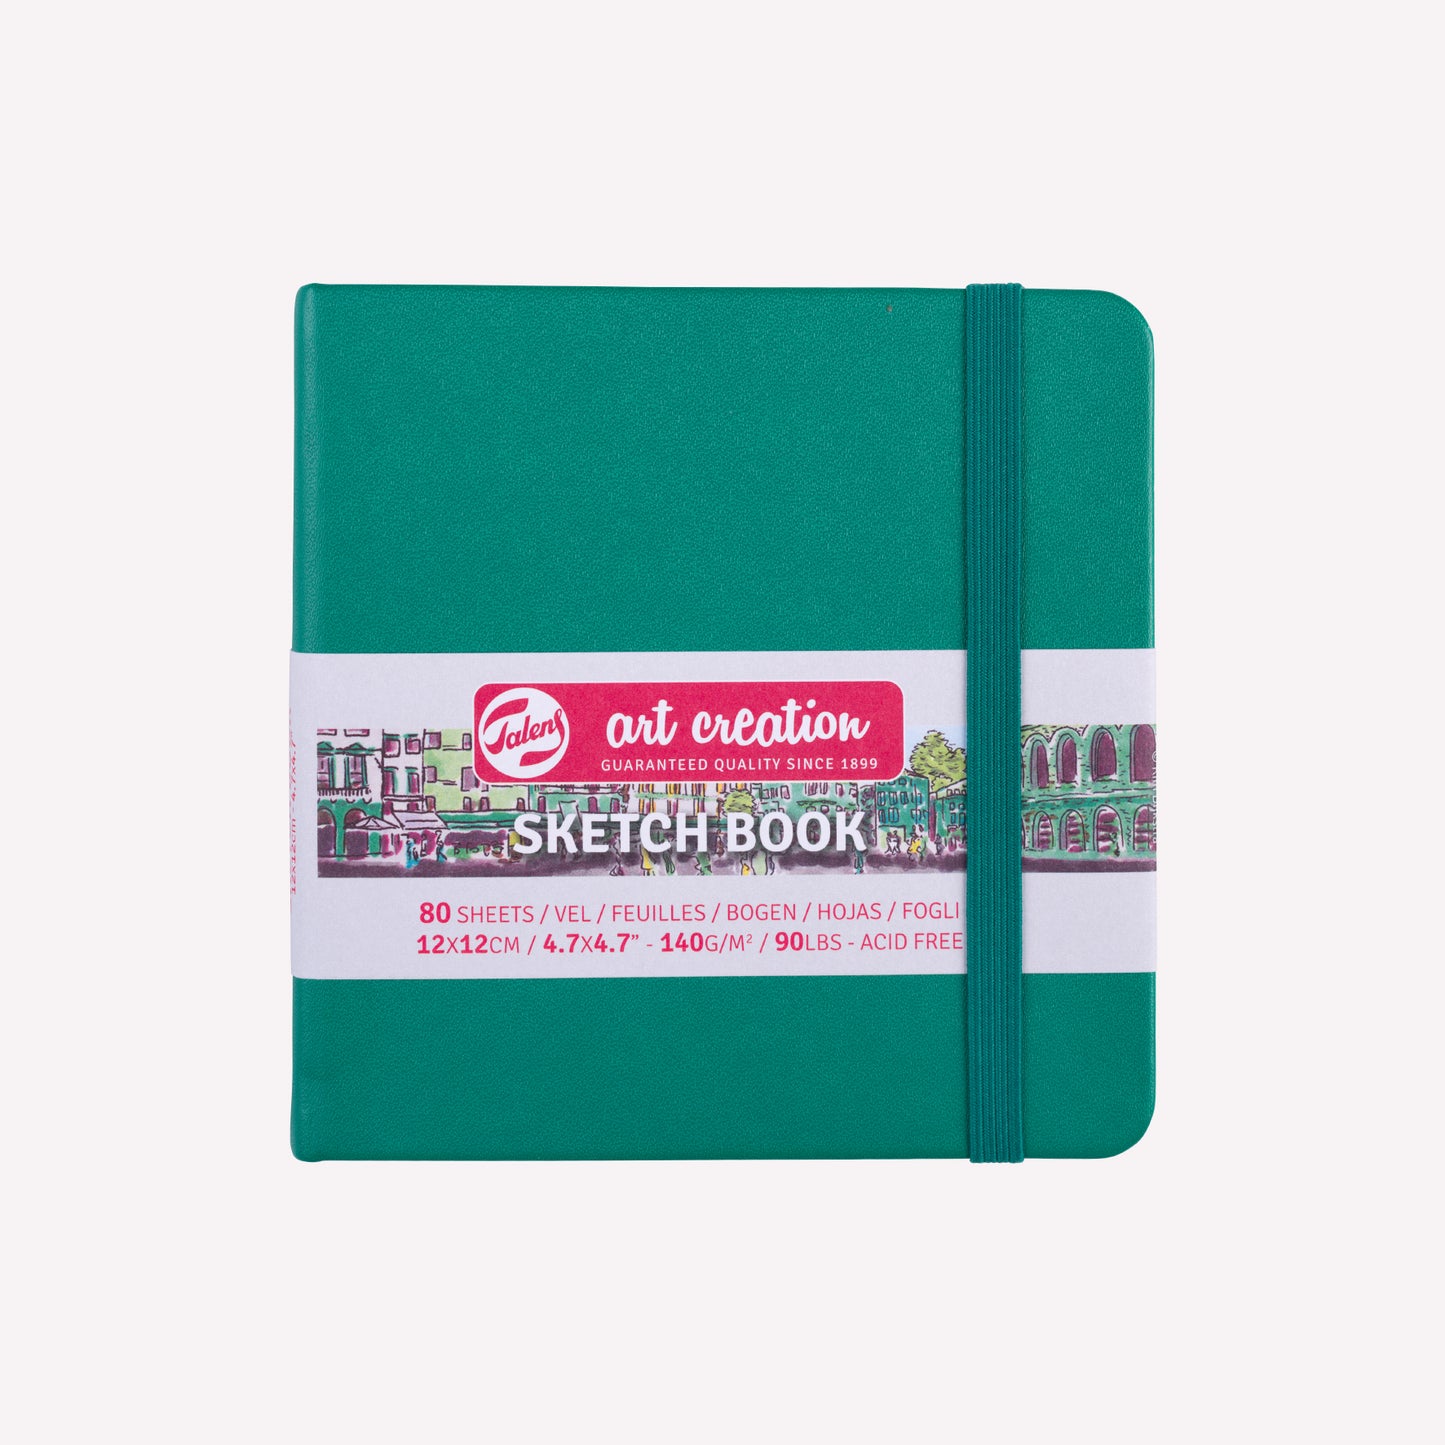 Royal Talens Art Creation pocket sized sketchbook with a sturdy Forest Green imitation-leather cover in size 12x12cm.